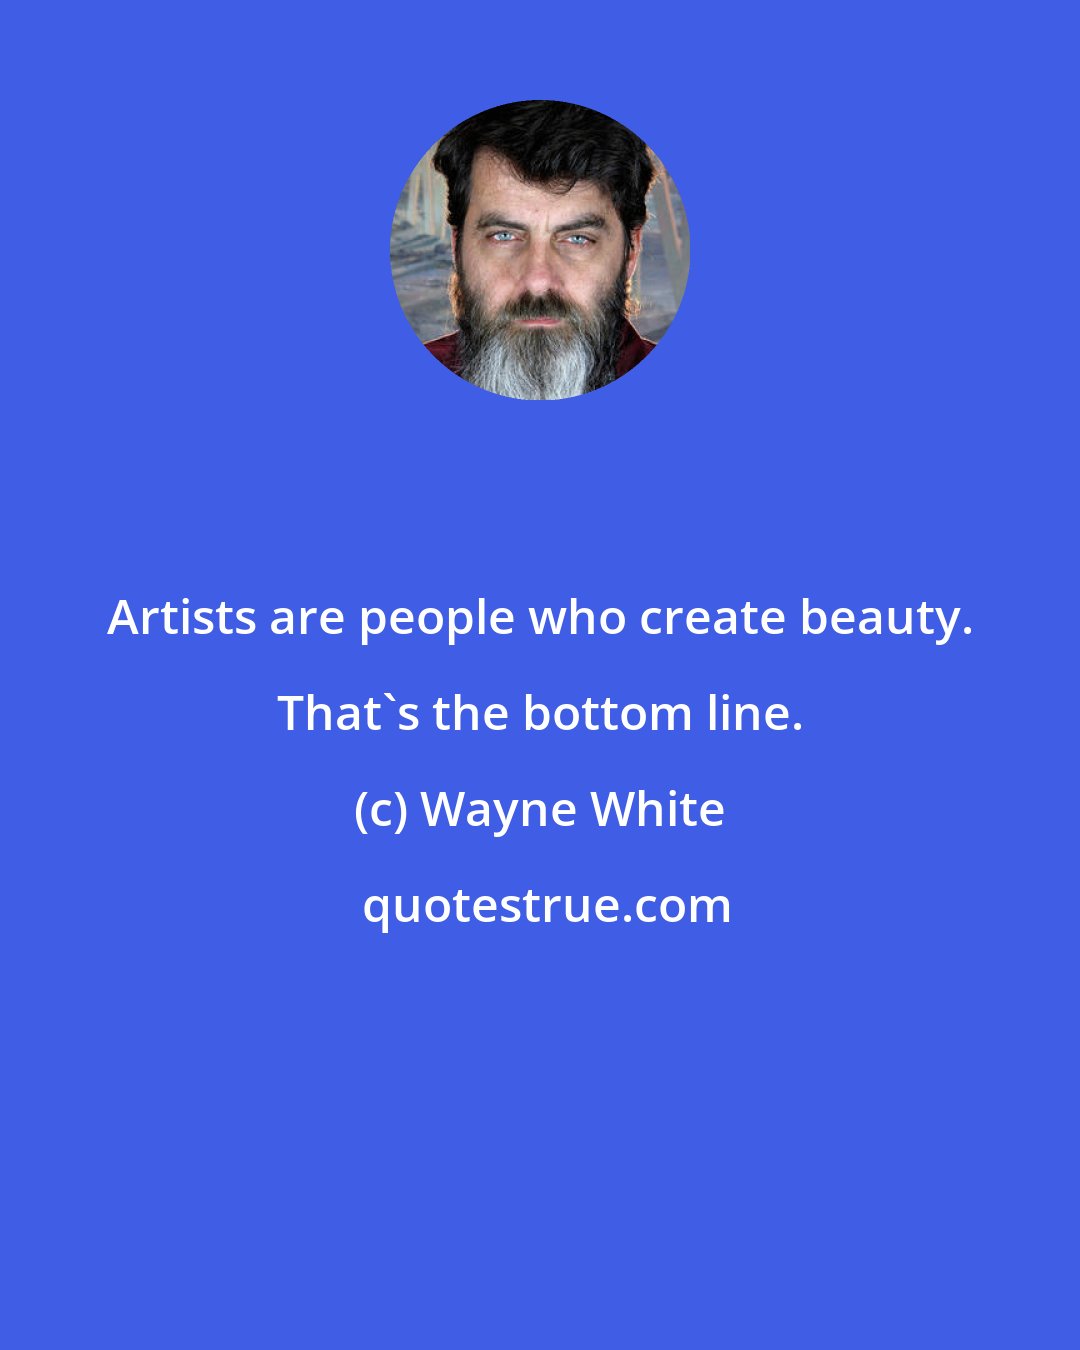 Wayne White: Artists are people who create beauty. That's the bottom line.